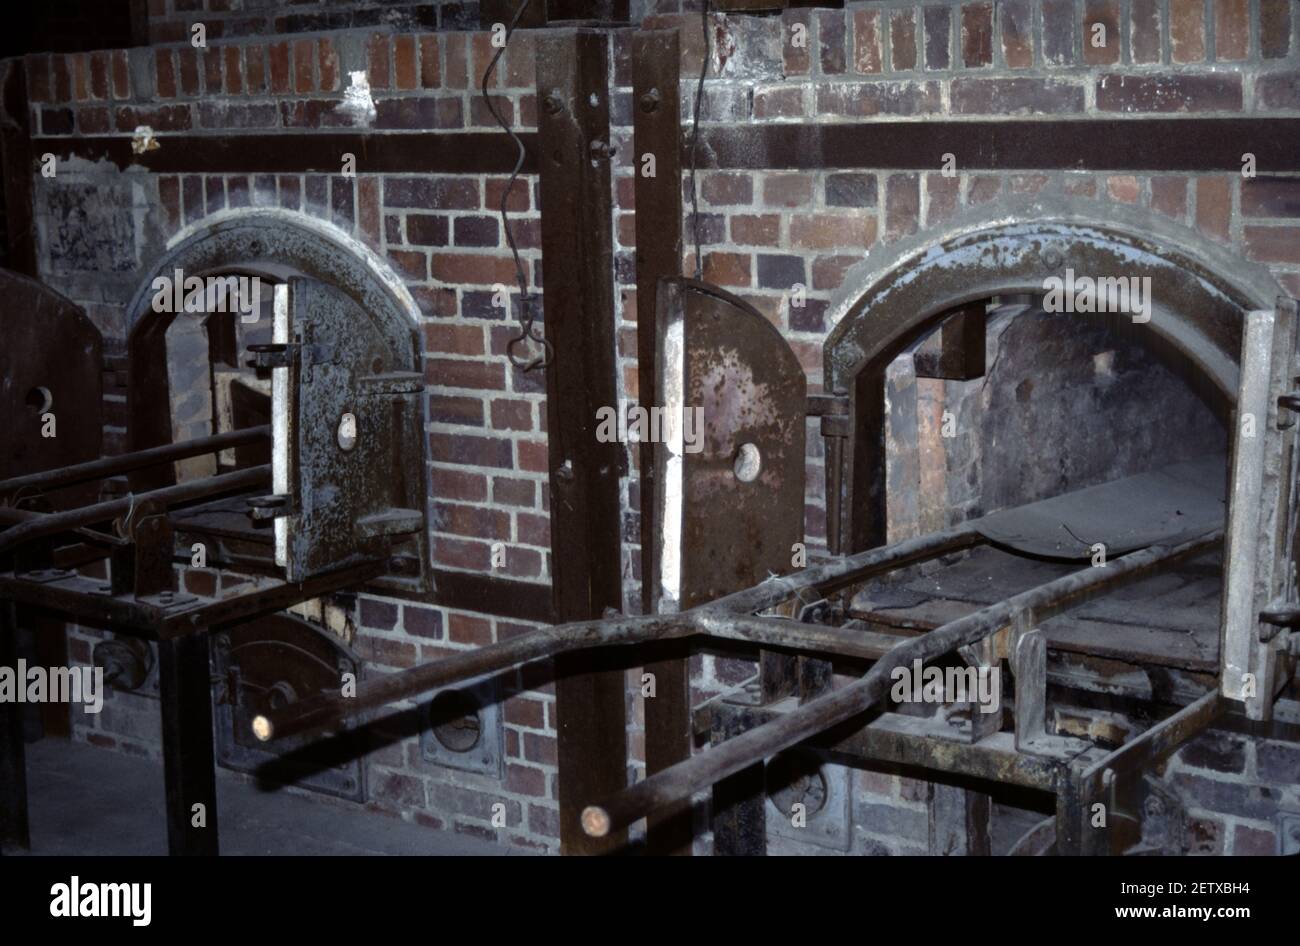 Dachau, Germany. 6/26/1990. Out of the five ovens at Dachau concentration camp, four were made by H. Kori and one by Topf & Söhne. Stock Photo